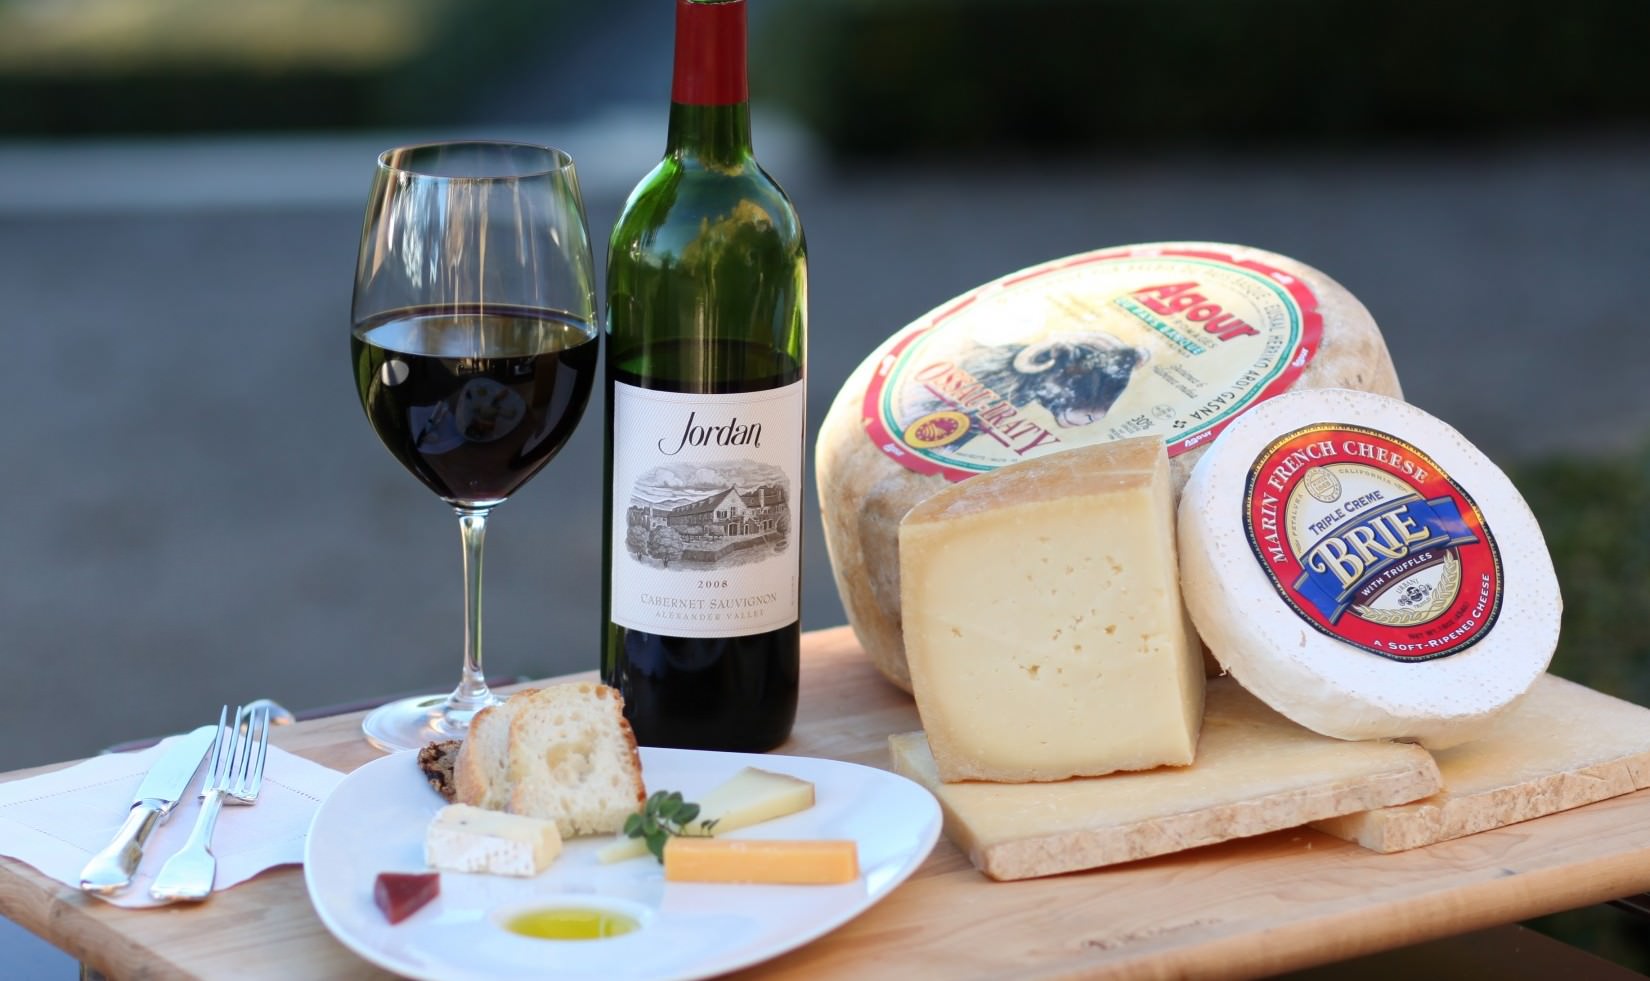 wheels of Agour Ossau-Iraty and Marin French Cheese Triple Cream Brie next to a cheese plate, a bottle of Jordan Winery cabernet and a poured glass of cabernet